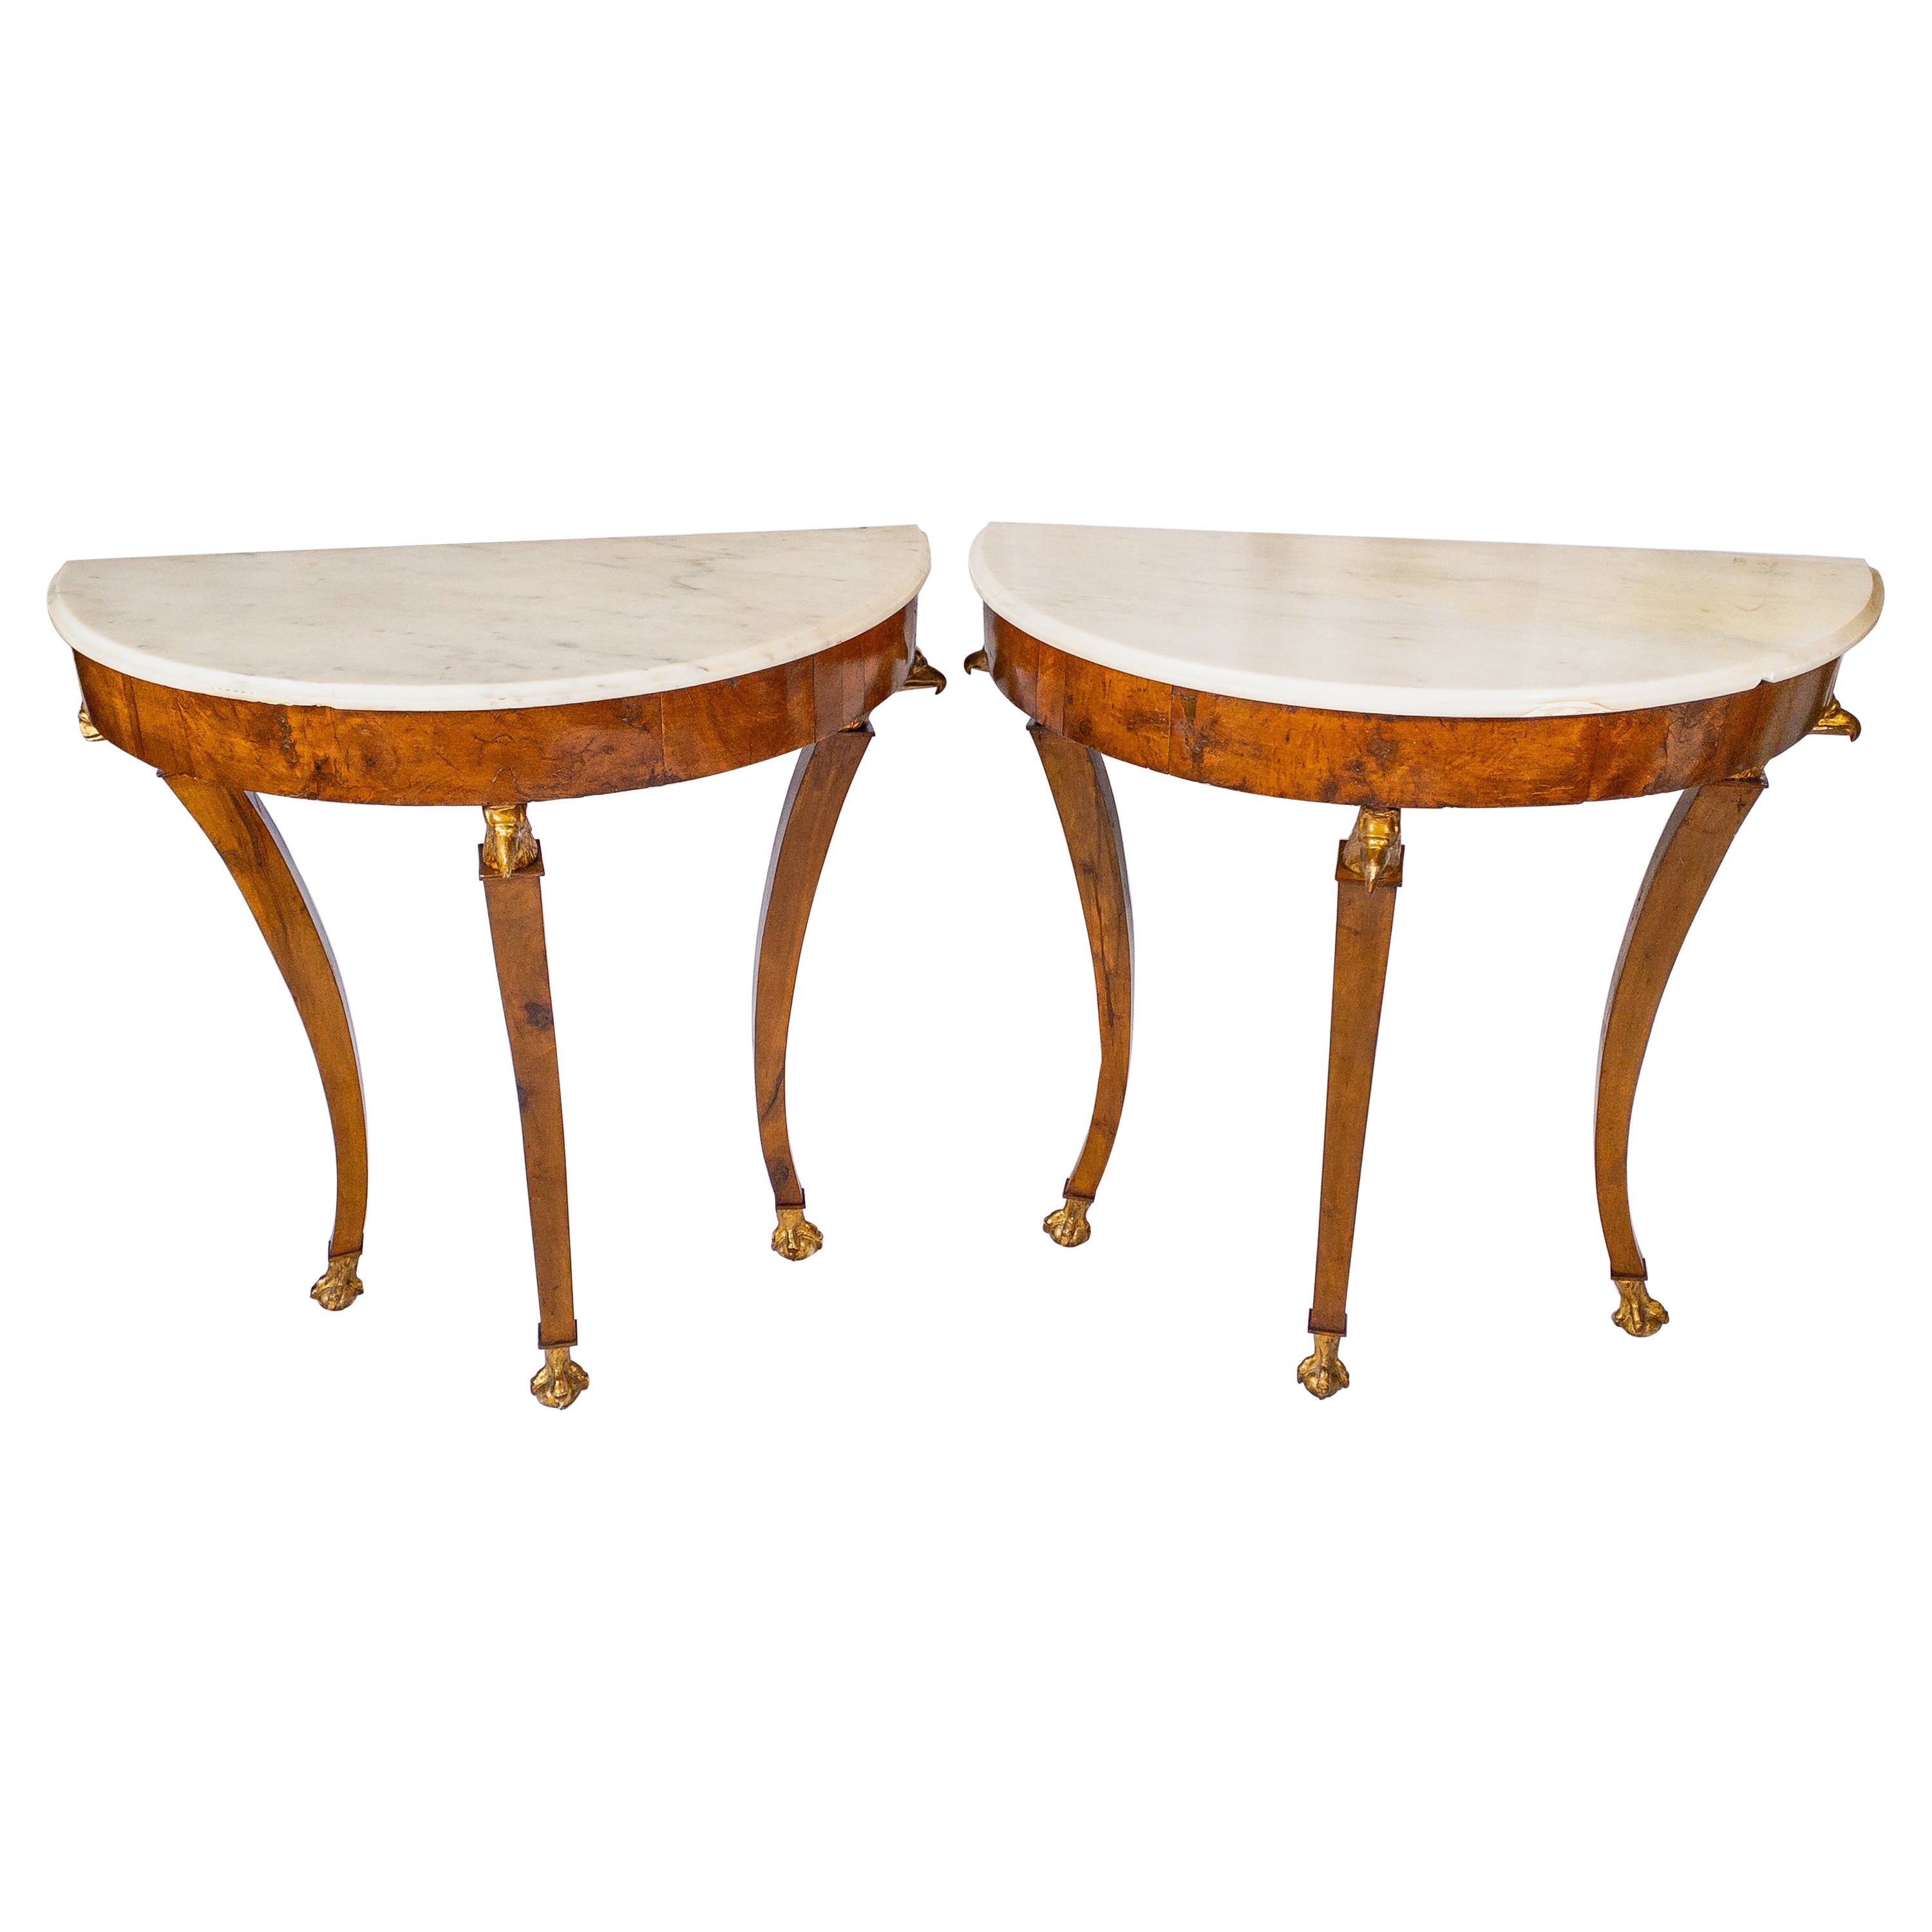 Pair of 18th Century Italian Marble Top Demi-lune Tables